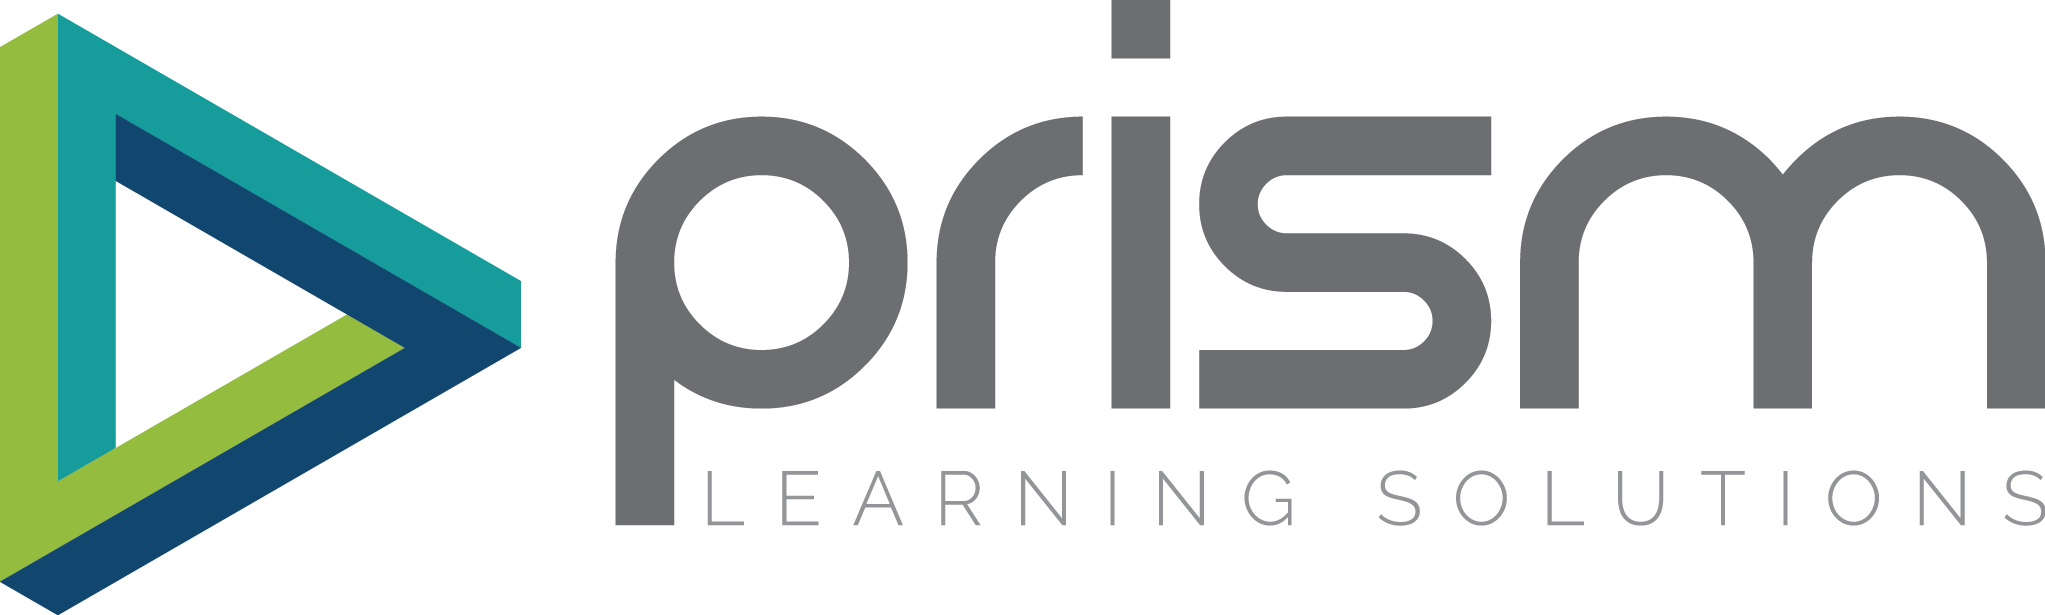 Prism Learning Solution's